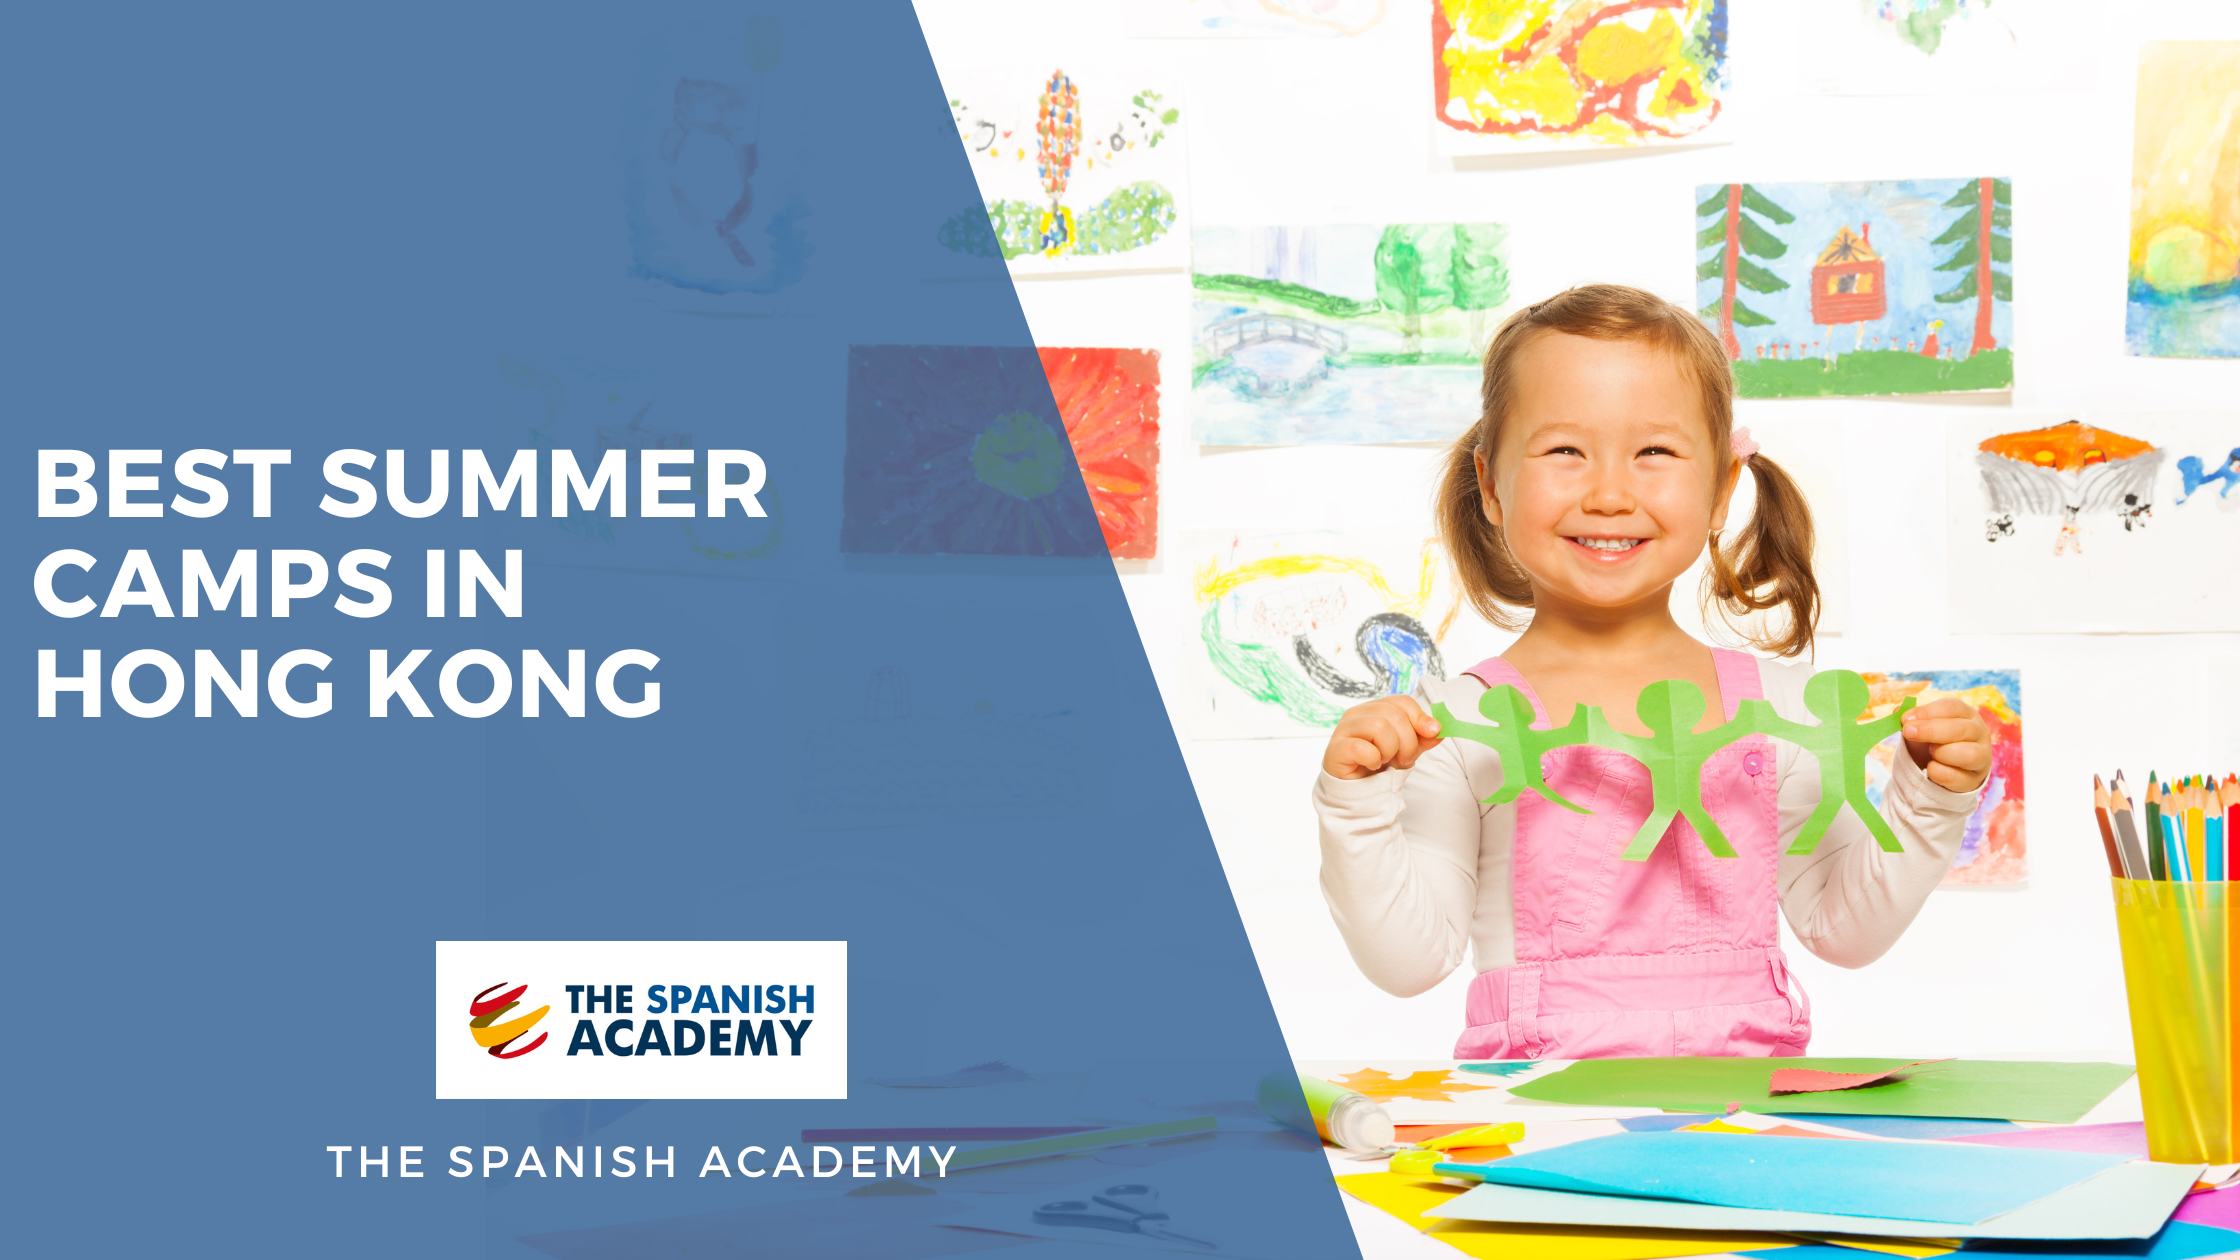 BEST SUMMER CAMPS IN HONG KONG The Spanish Academy